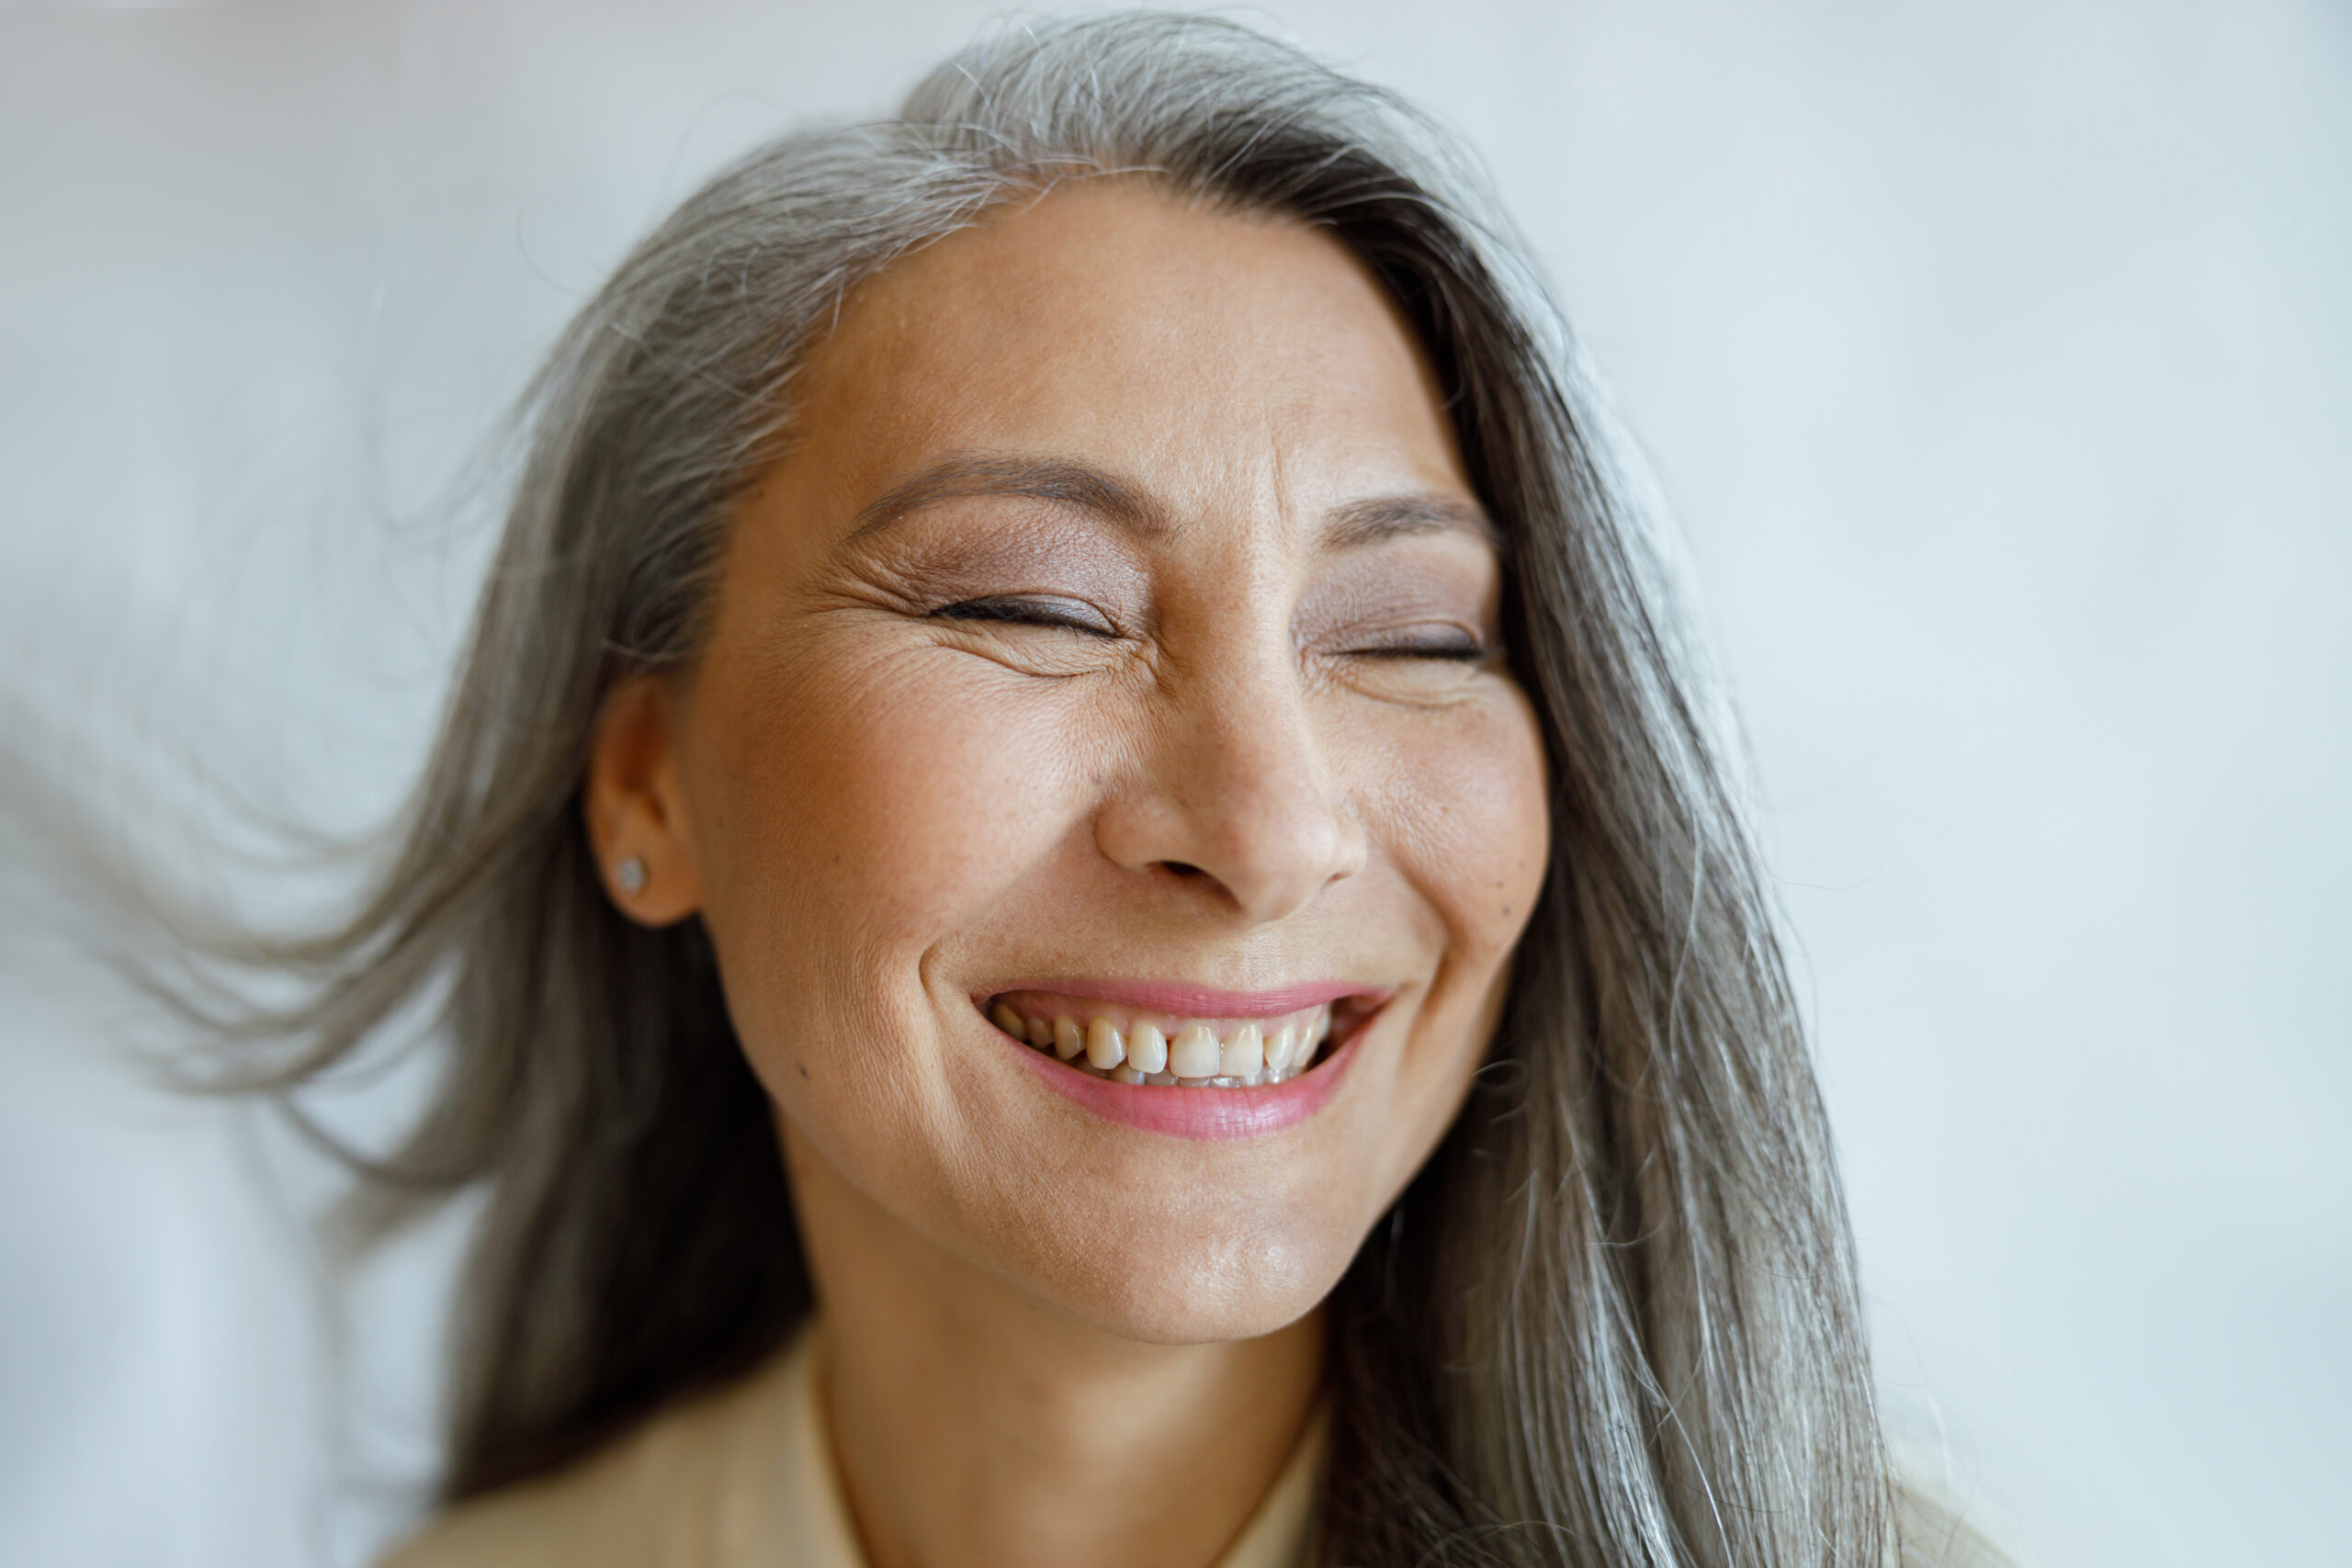 Photo of a mature Asian woman with long gray hair, smiling widely with her eyes closed.